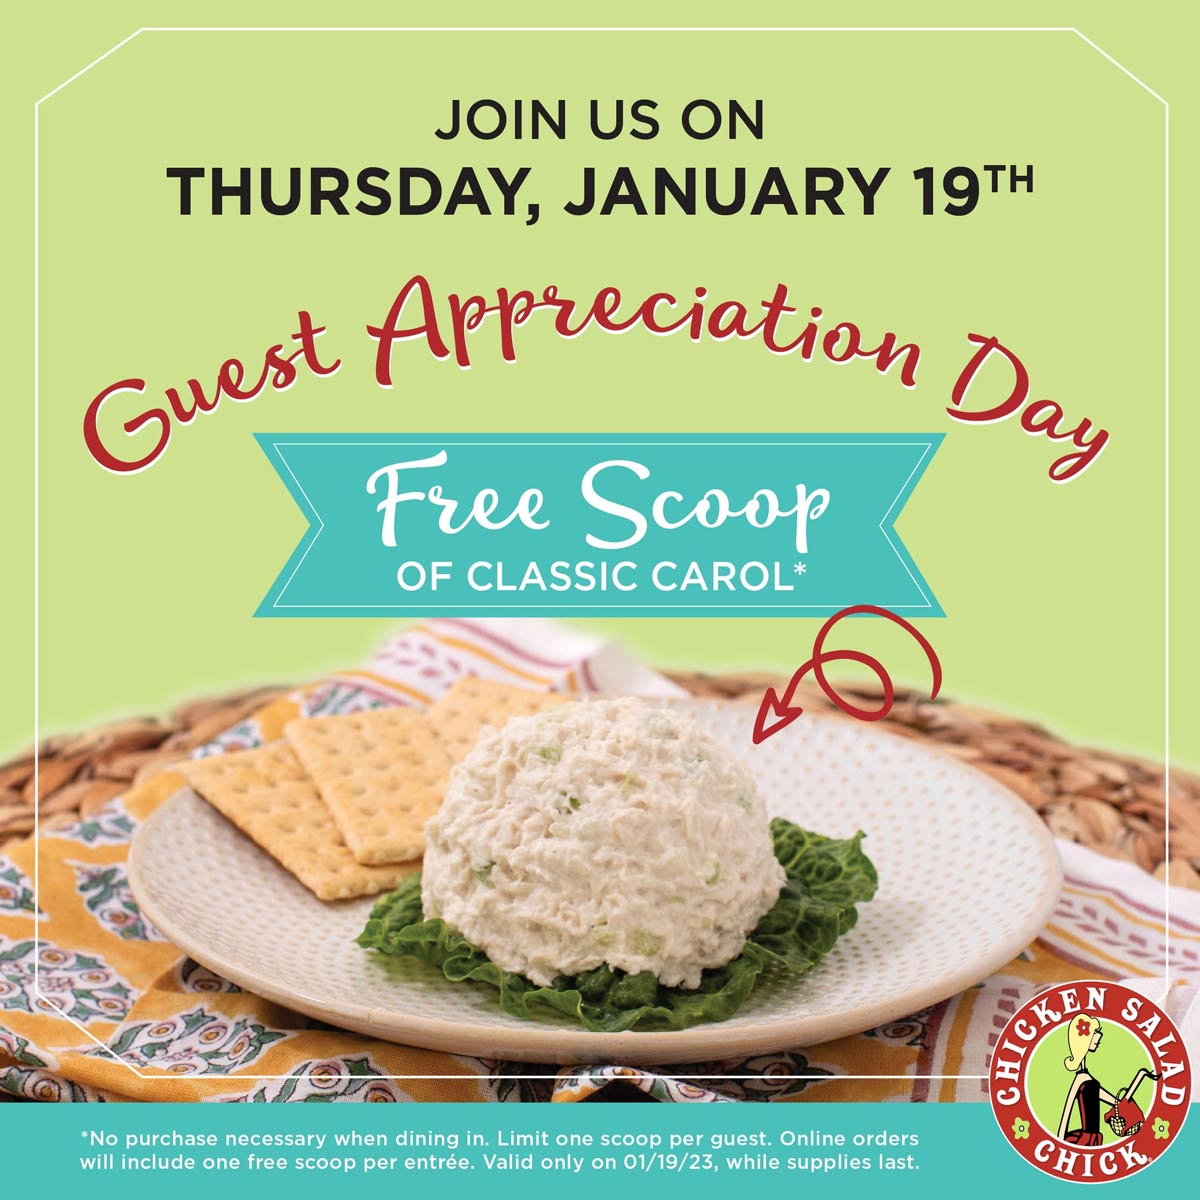 Chicken Salad Chick restaurants Coupon  Free scoop of classic carol today at Chicken Salad Chick restaurants, no purchase necessary #chickensaladchick 